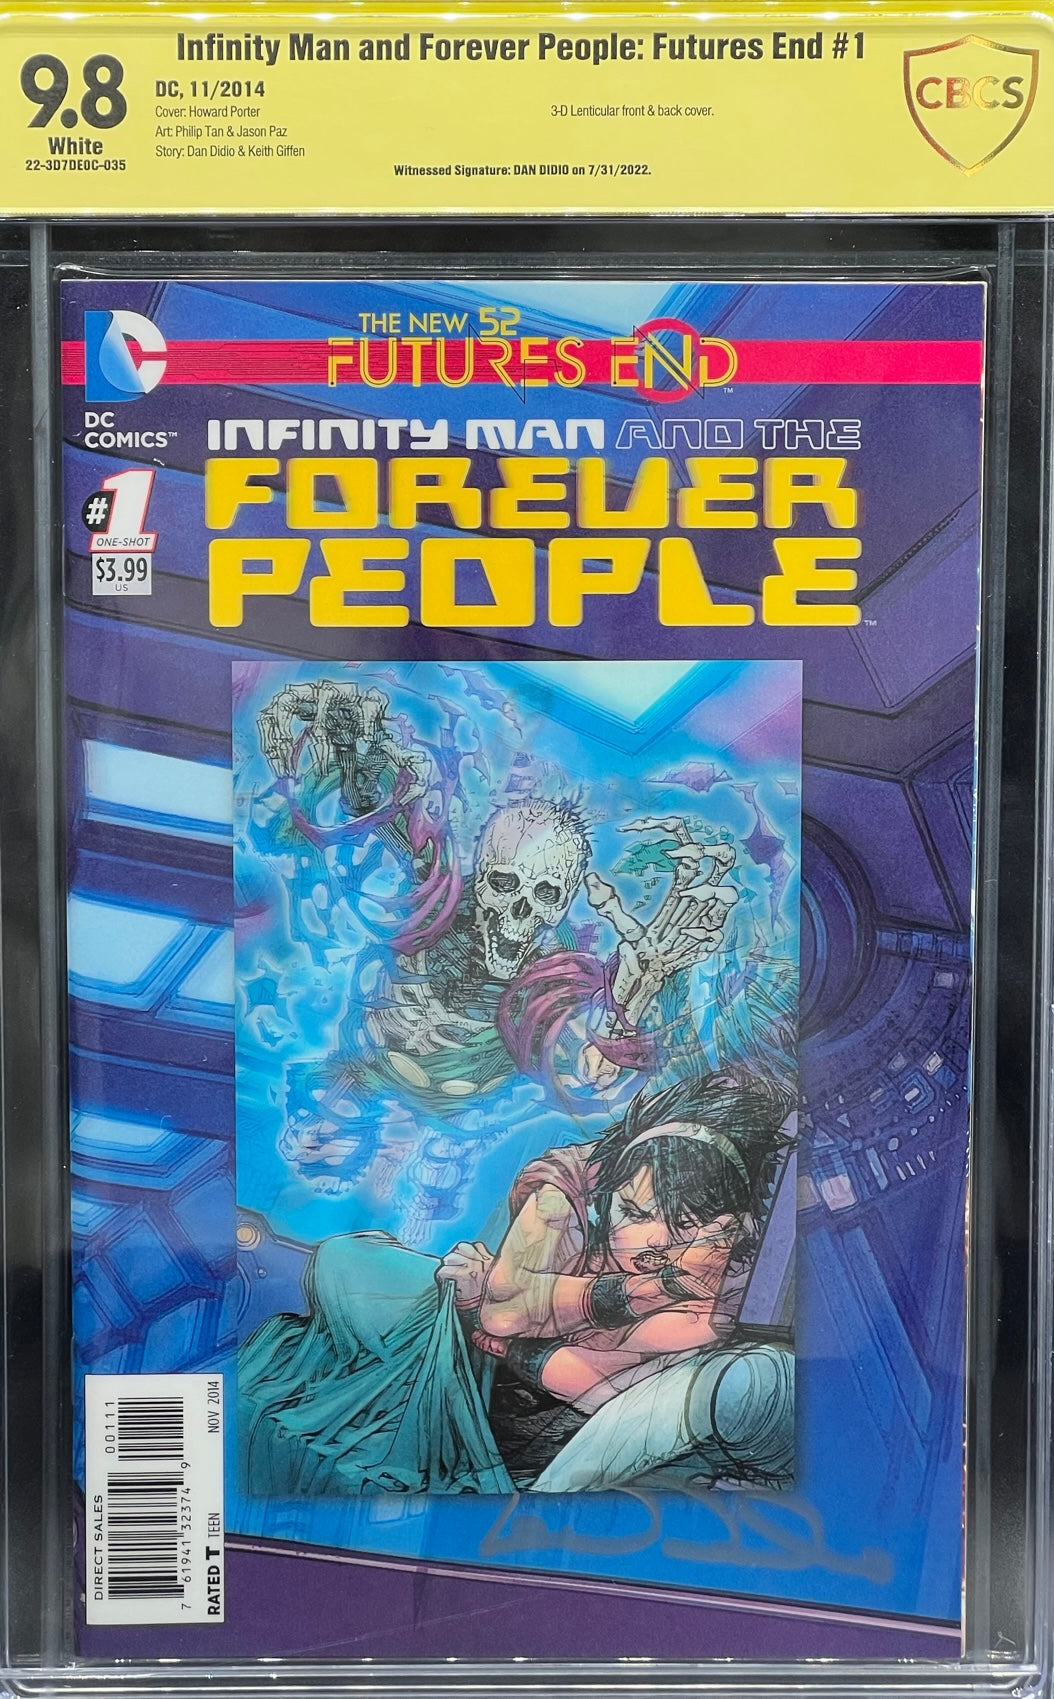 Infinity Man and Forever People: Futures End #1 CBCS 9.8 Yellow Label Dan Didio